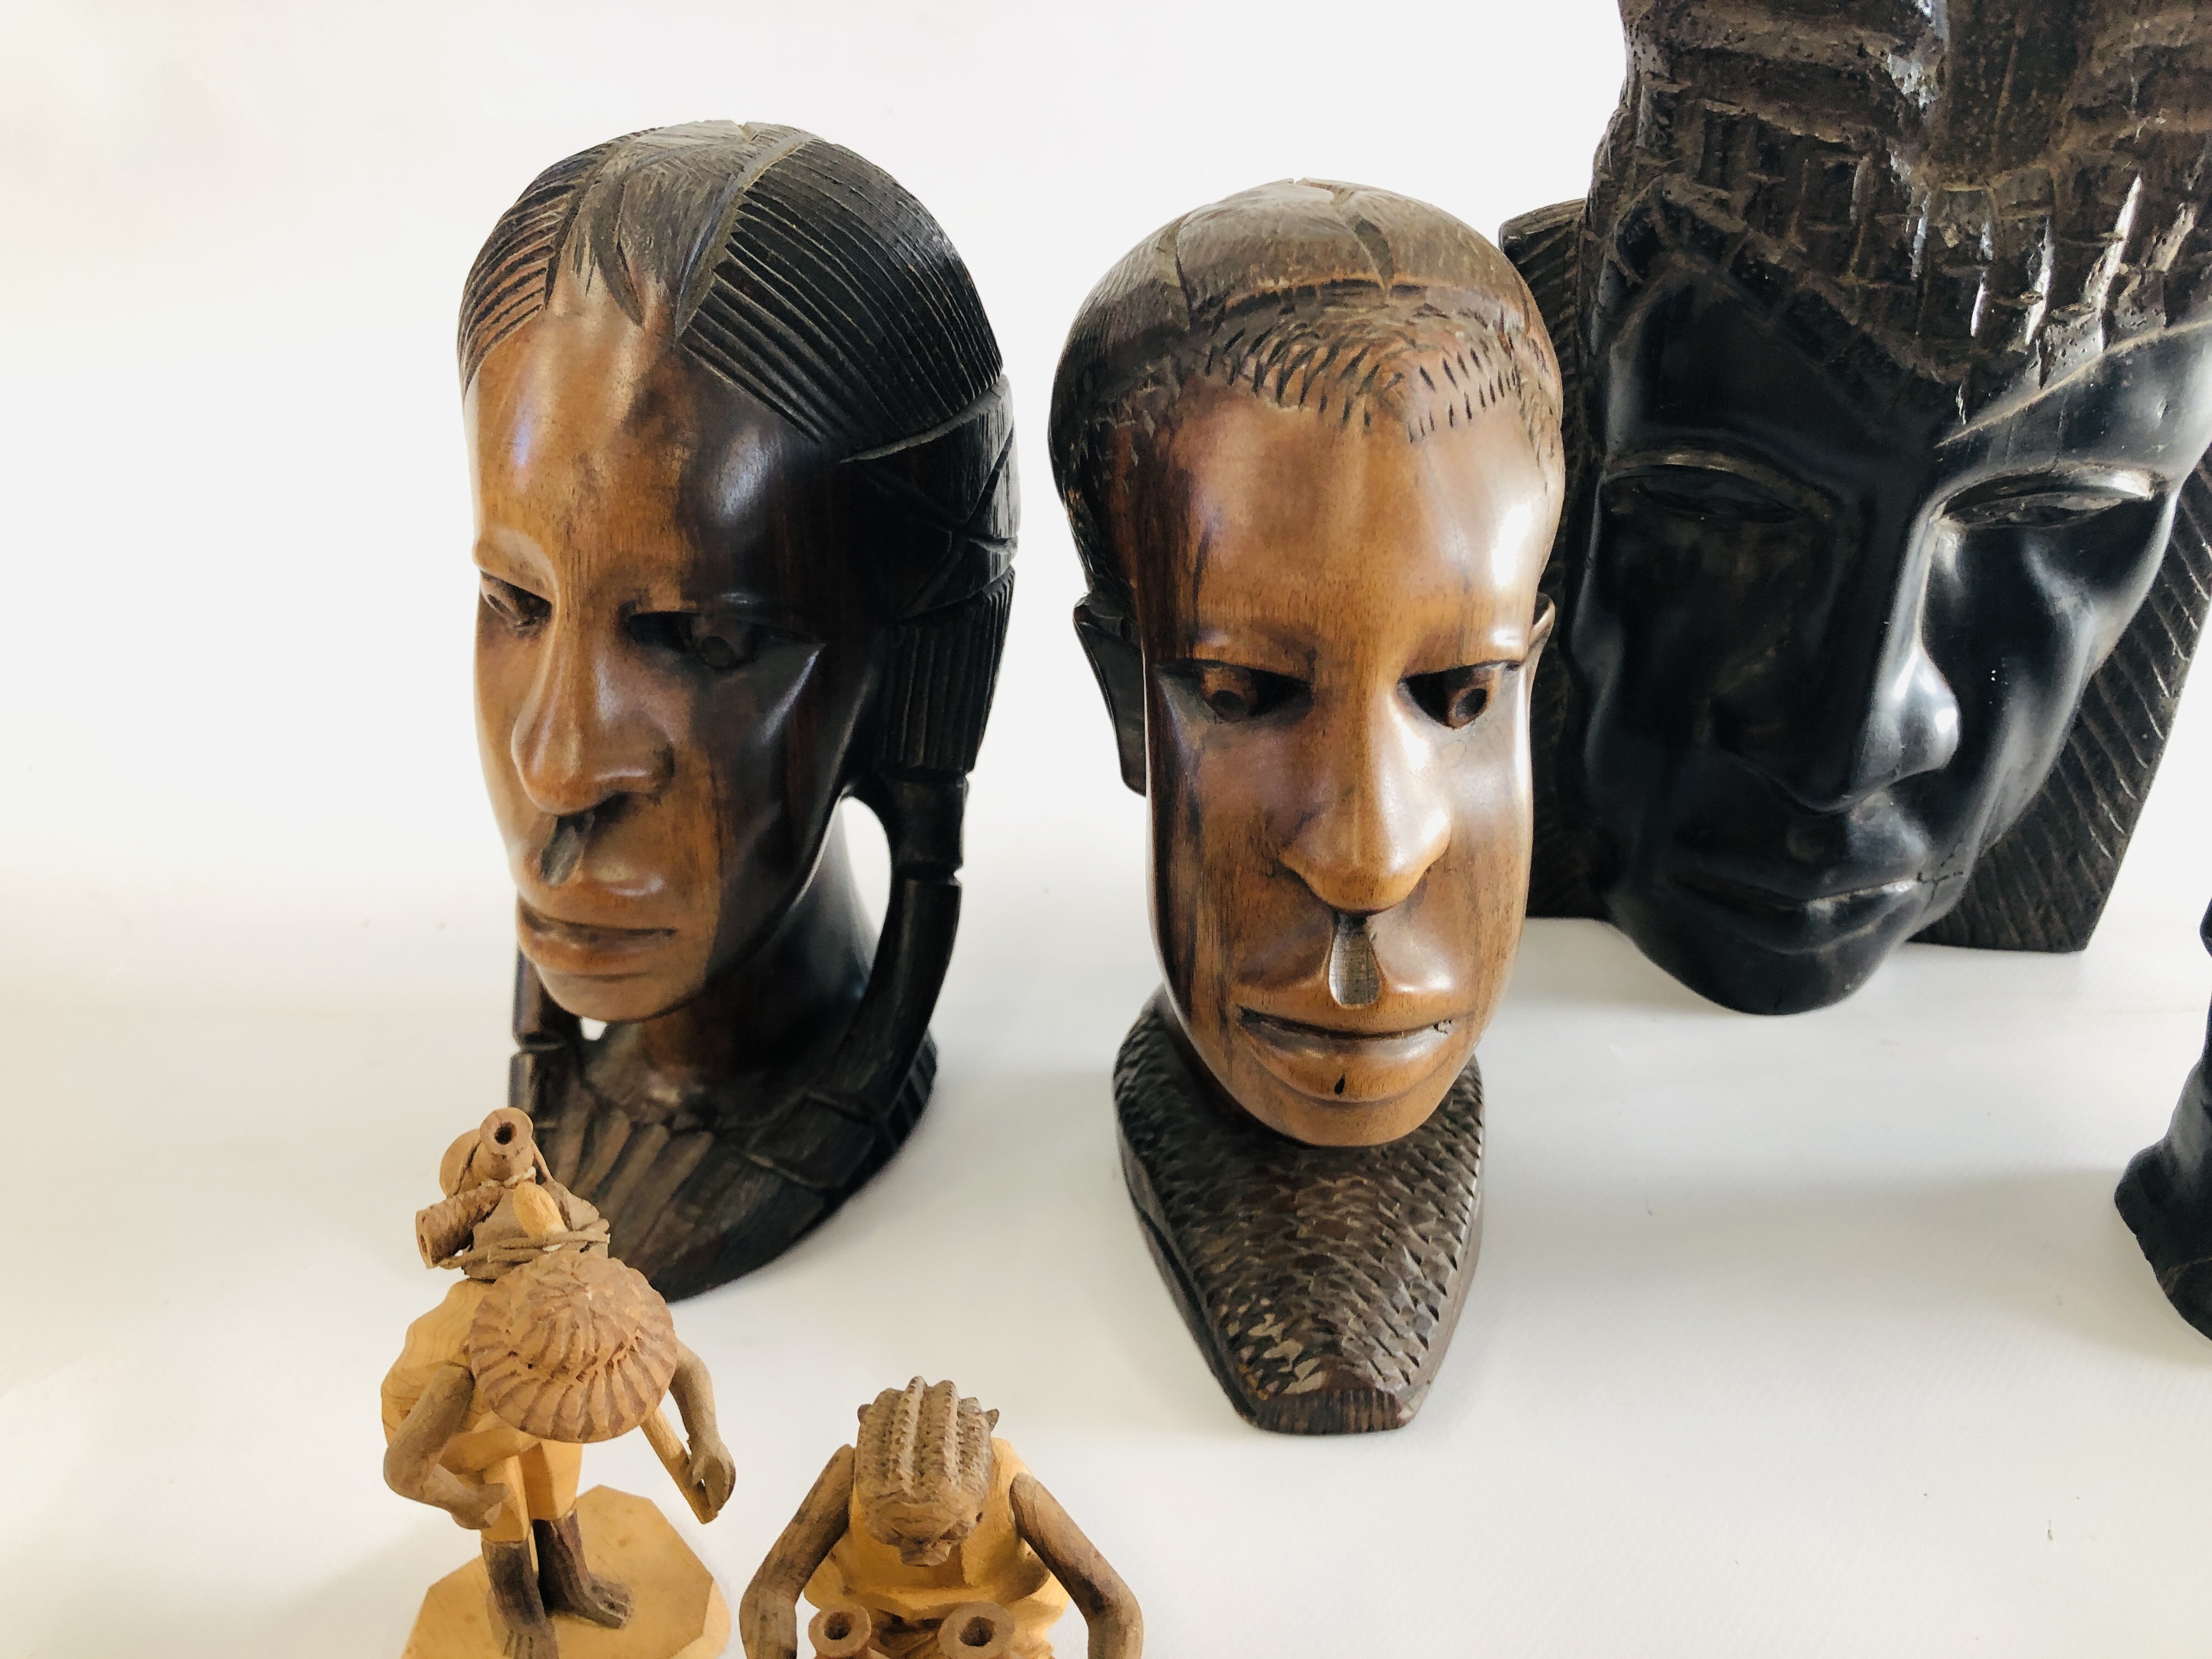 4 HARDWOOD STUDIES TO INCLUDE BUSTS ALONG WITH A GROUP OF TERRACOTTA WORKING FIGURES. - Image 4 of 6